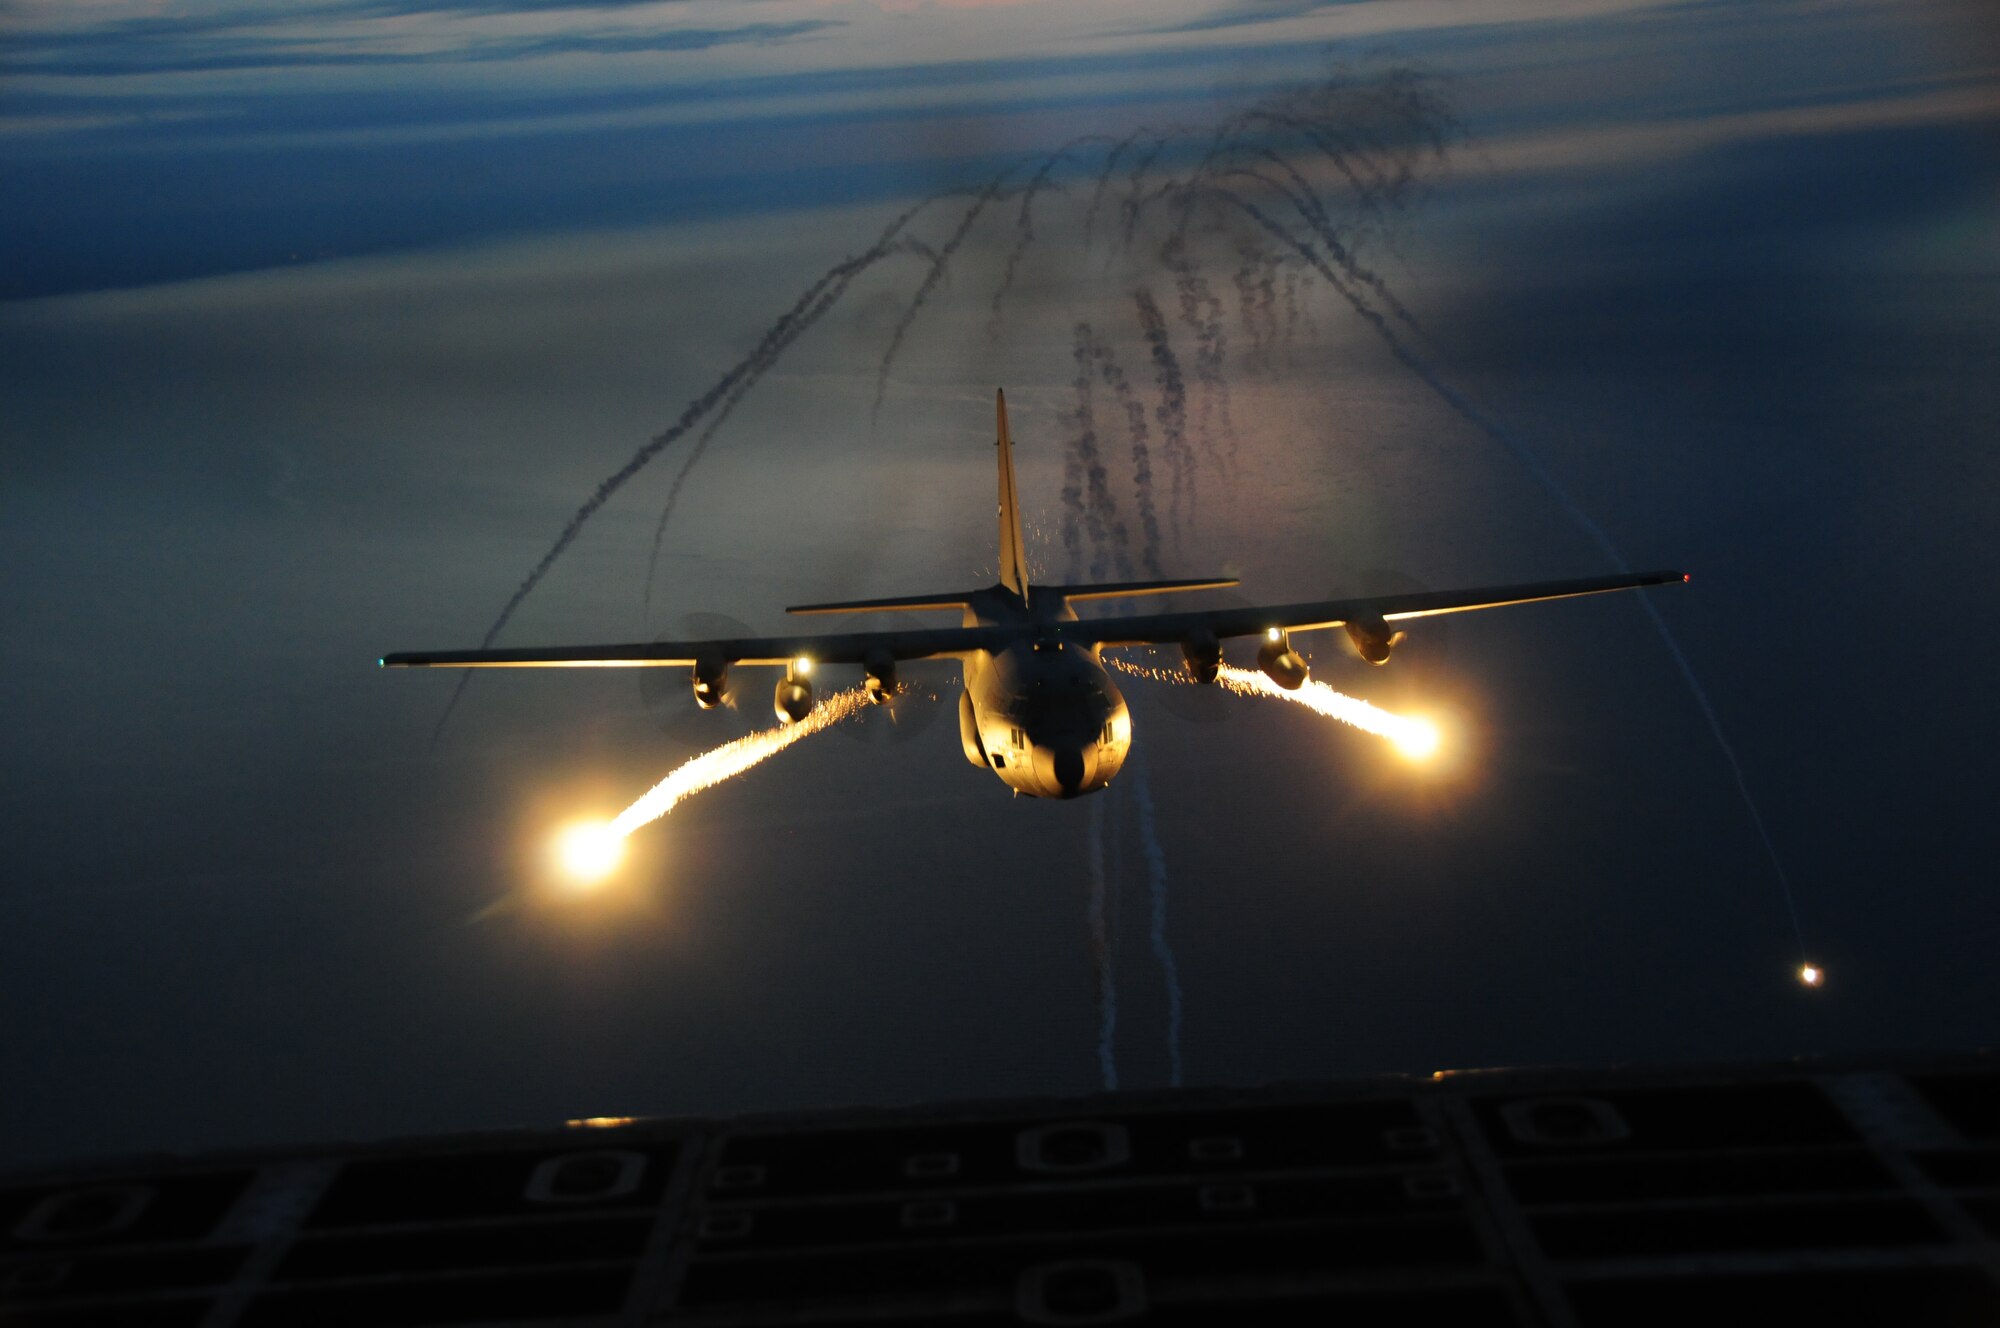 The 107th Airlift Wing went on another night formation training mission, this time fully loaded with live flares to be used in a training scenario.  A "Flare" is an aerial infrared countermeasure to counter and infrared homing (heat seeking) surface-to air or air-to-air missile.Sept. 25, 2012 (U.S. Air Force Photo/Senior Master Sgt. Ray Lloyd)
